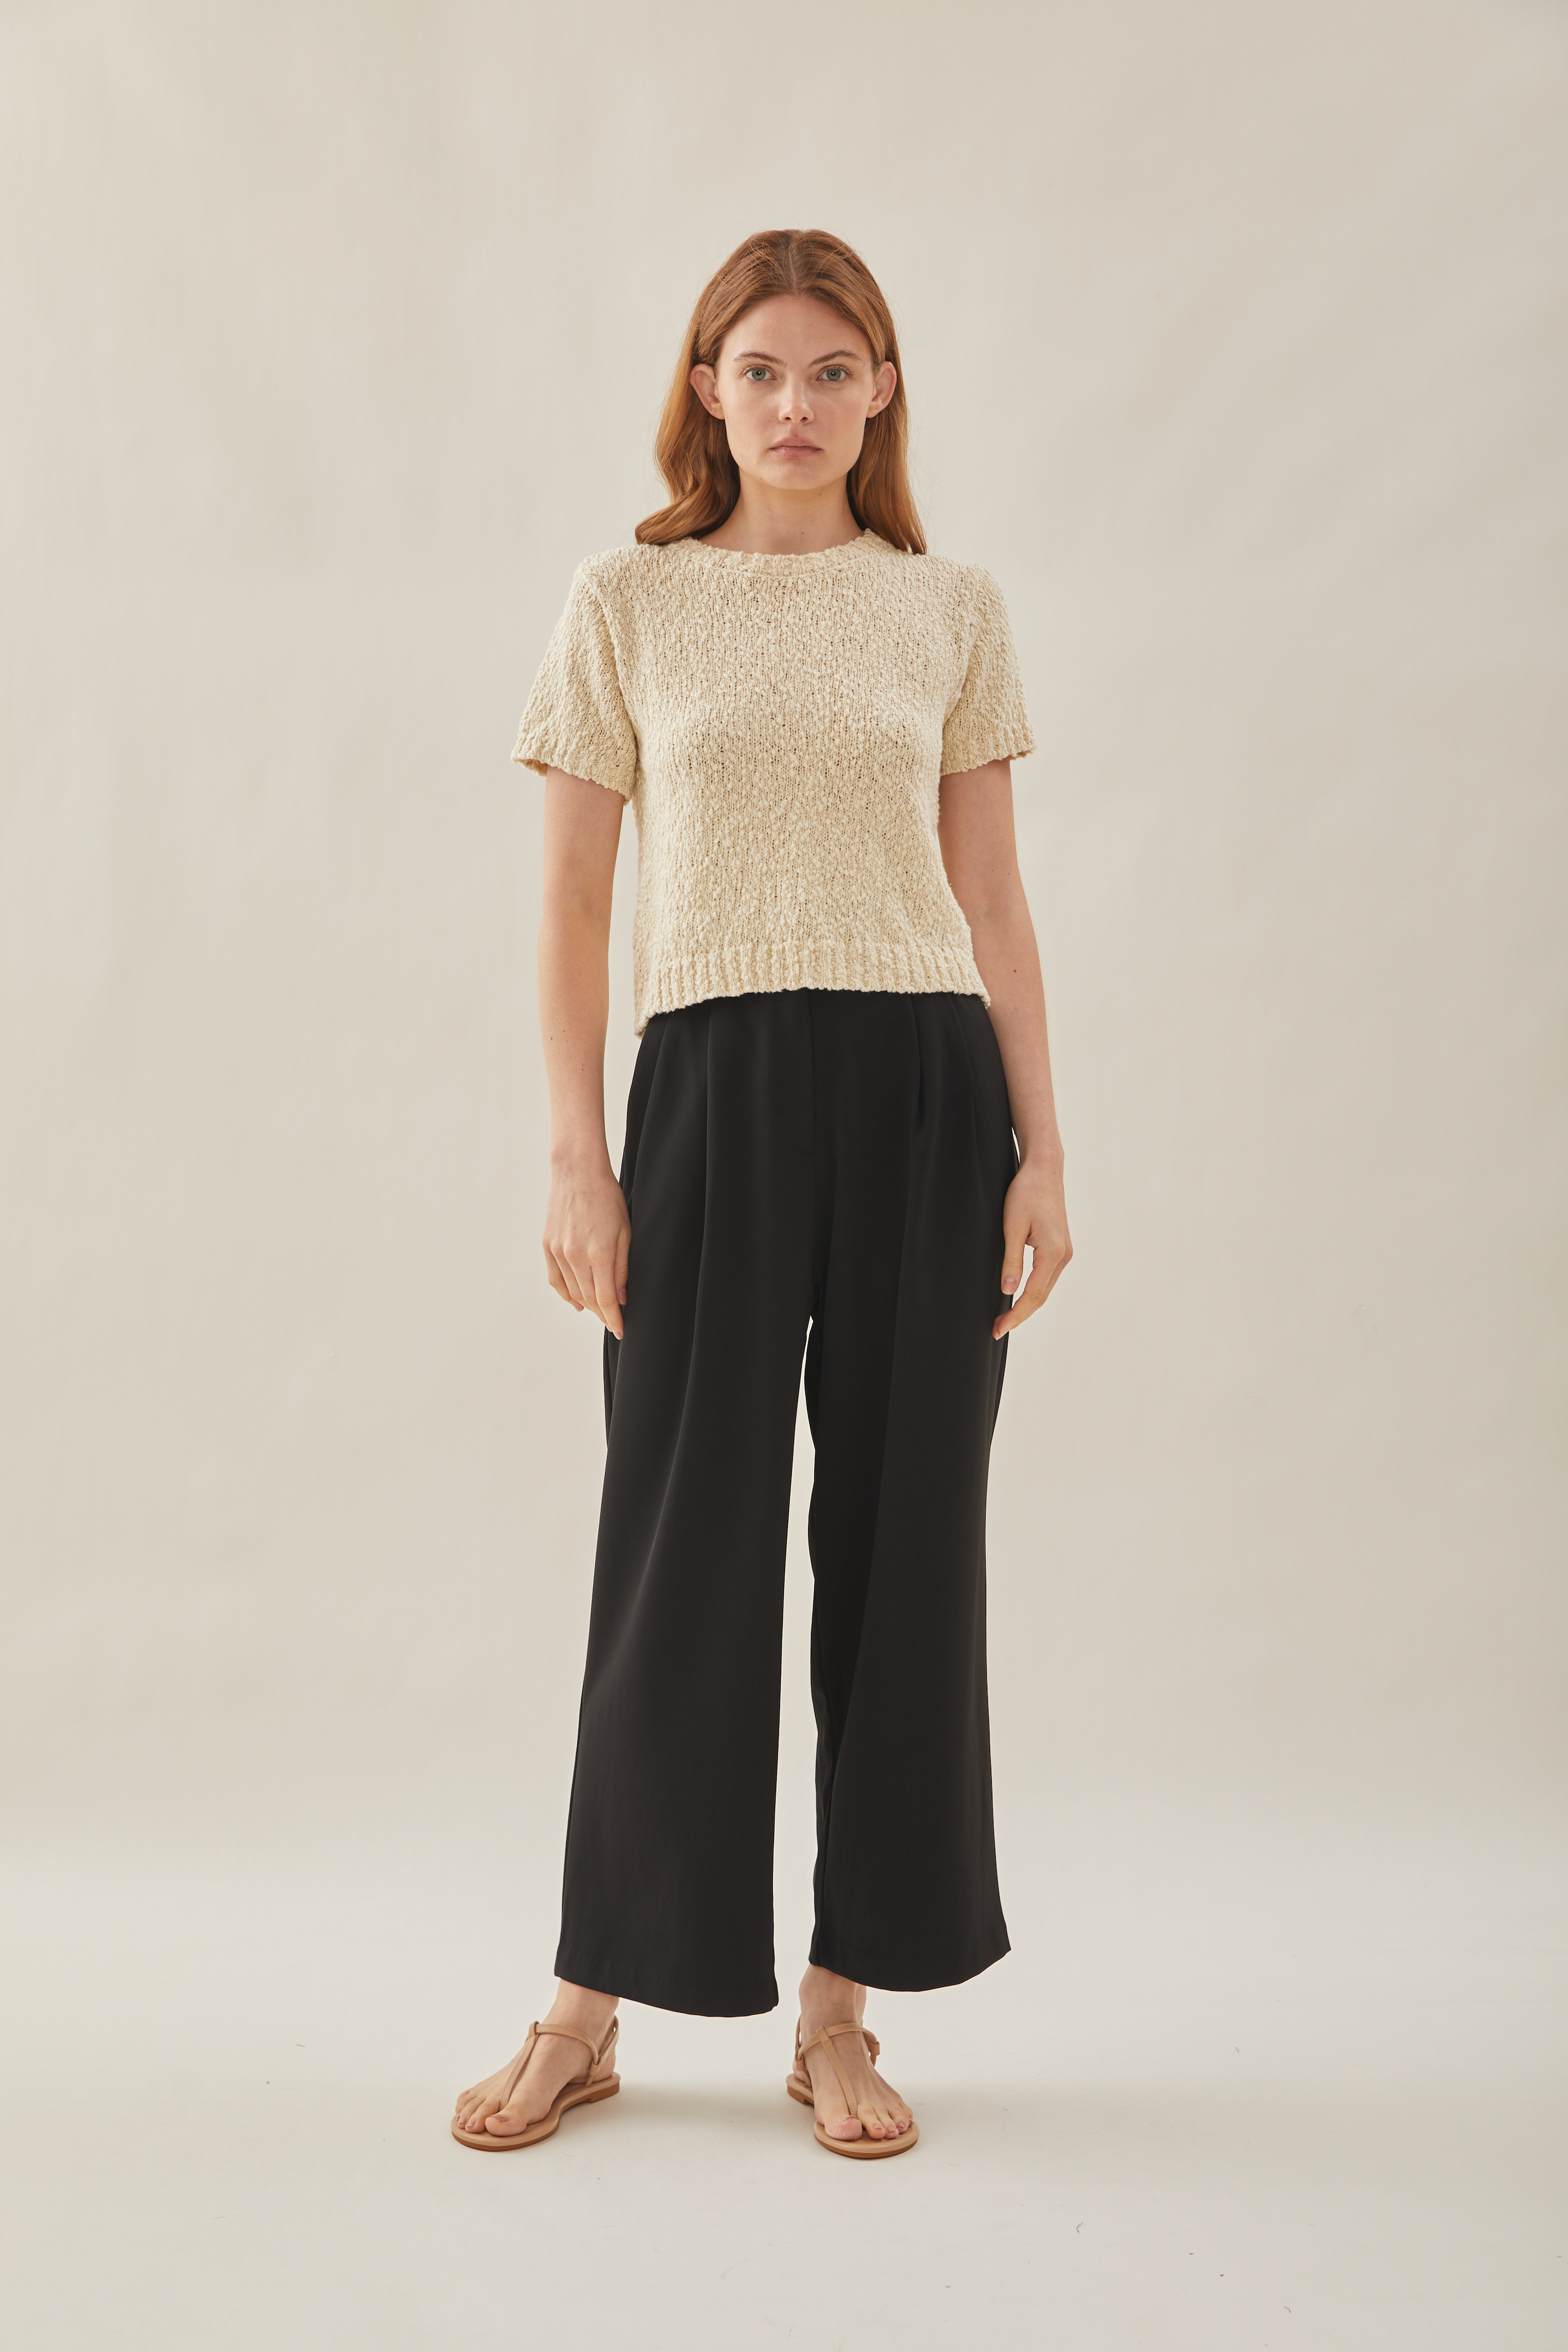 Textured Knit Top in Natural